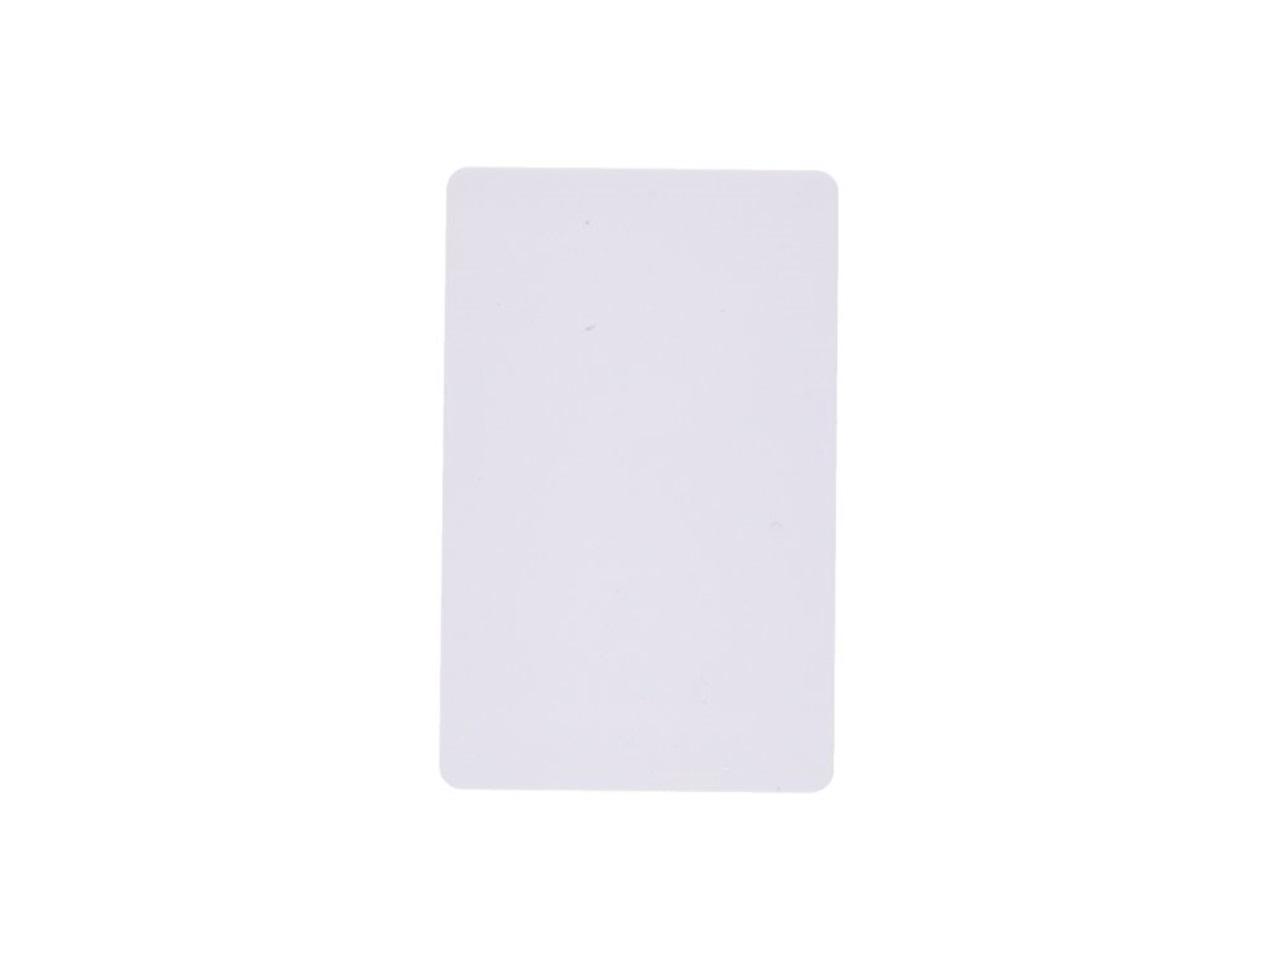 BADGY CBGC0030W Blank ID Cards,30 mil - image 4 of 8